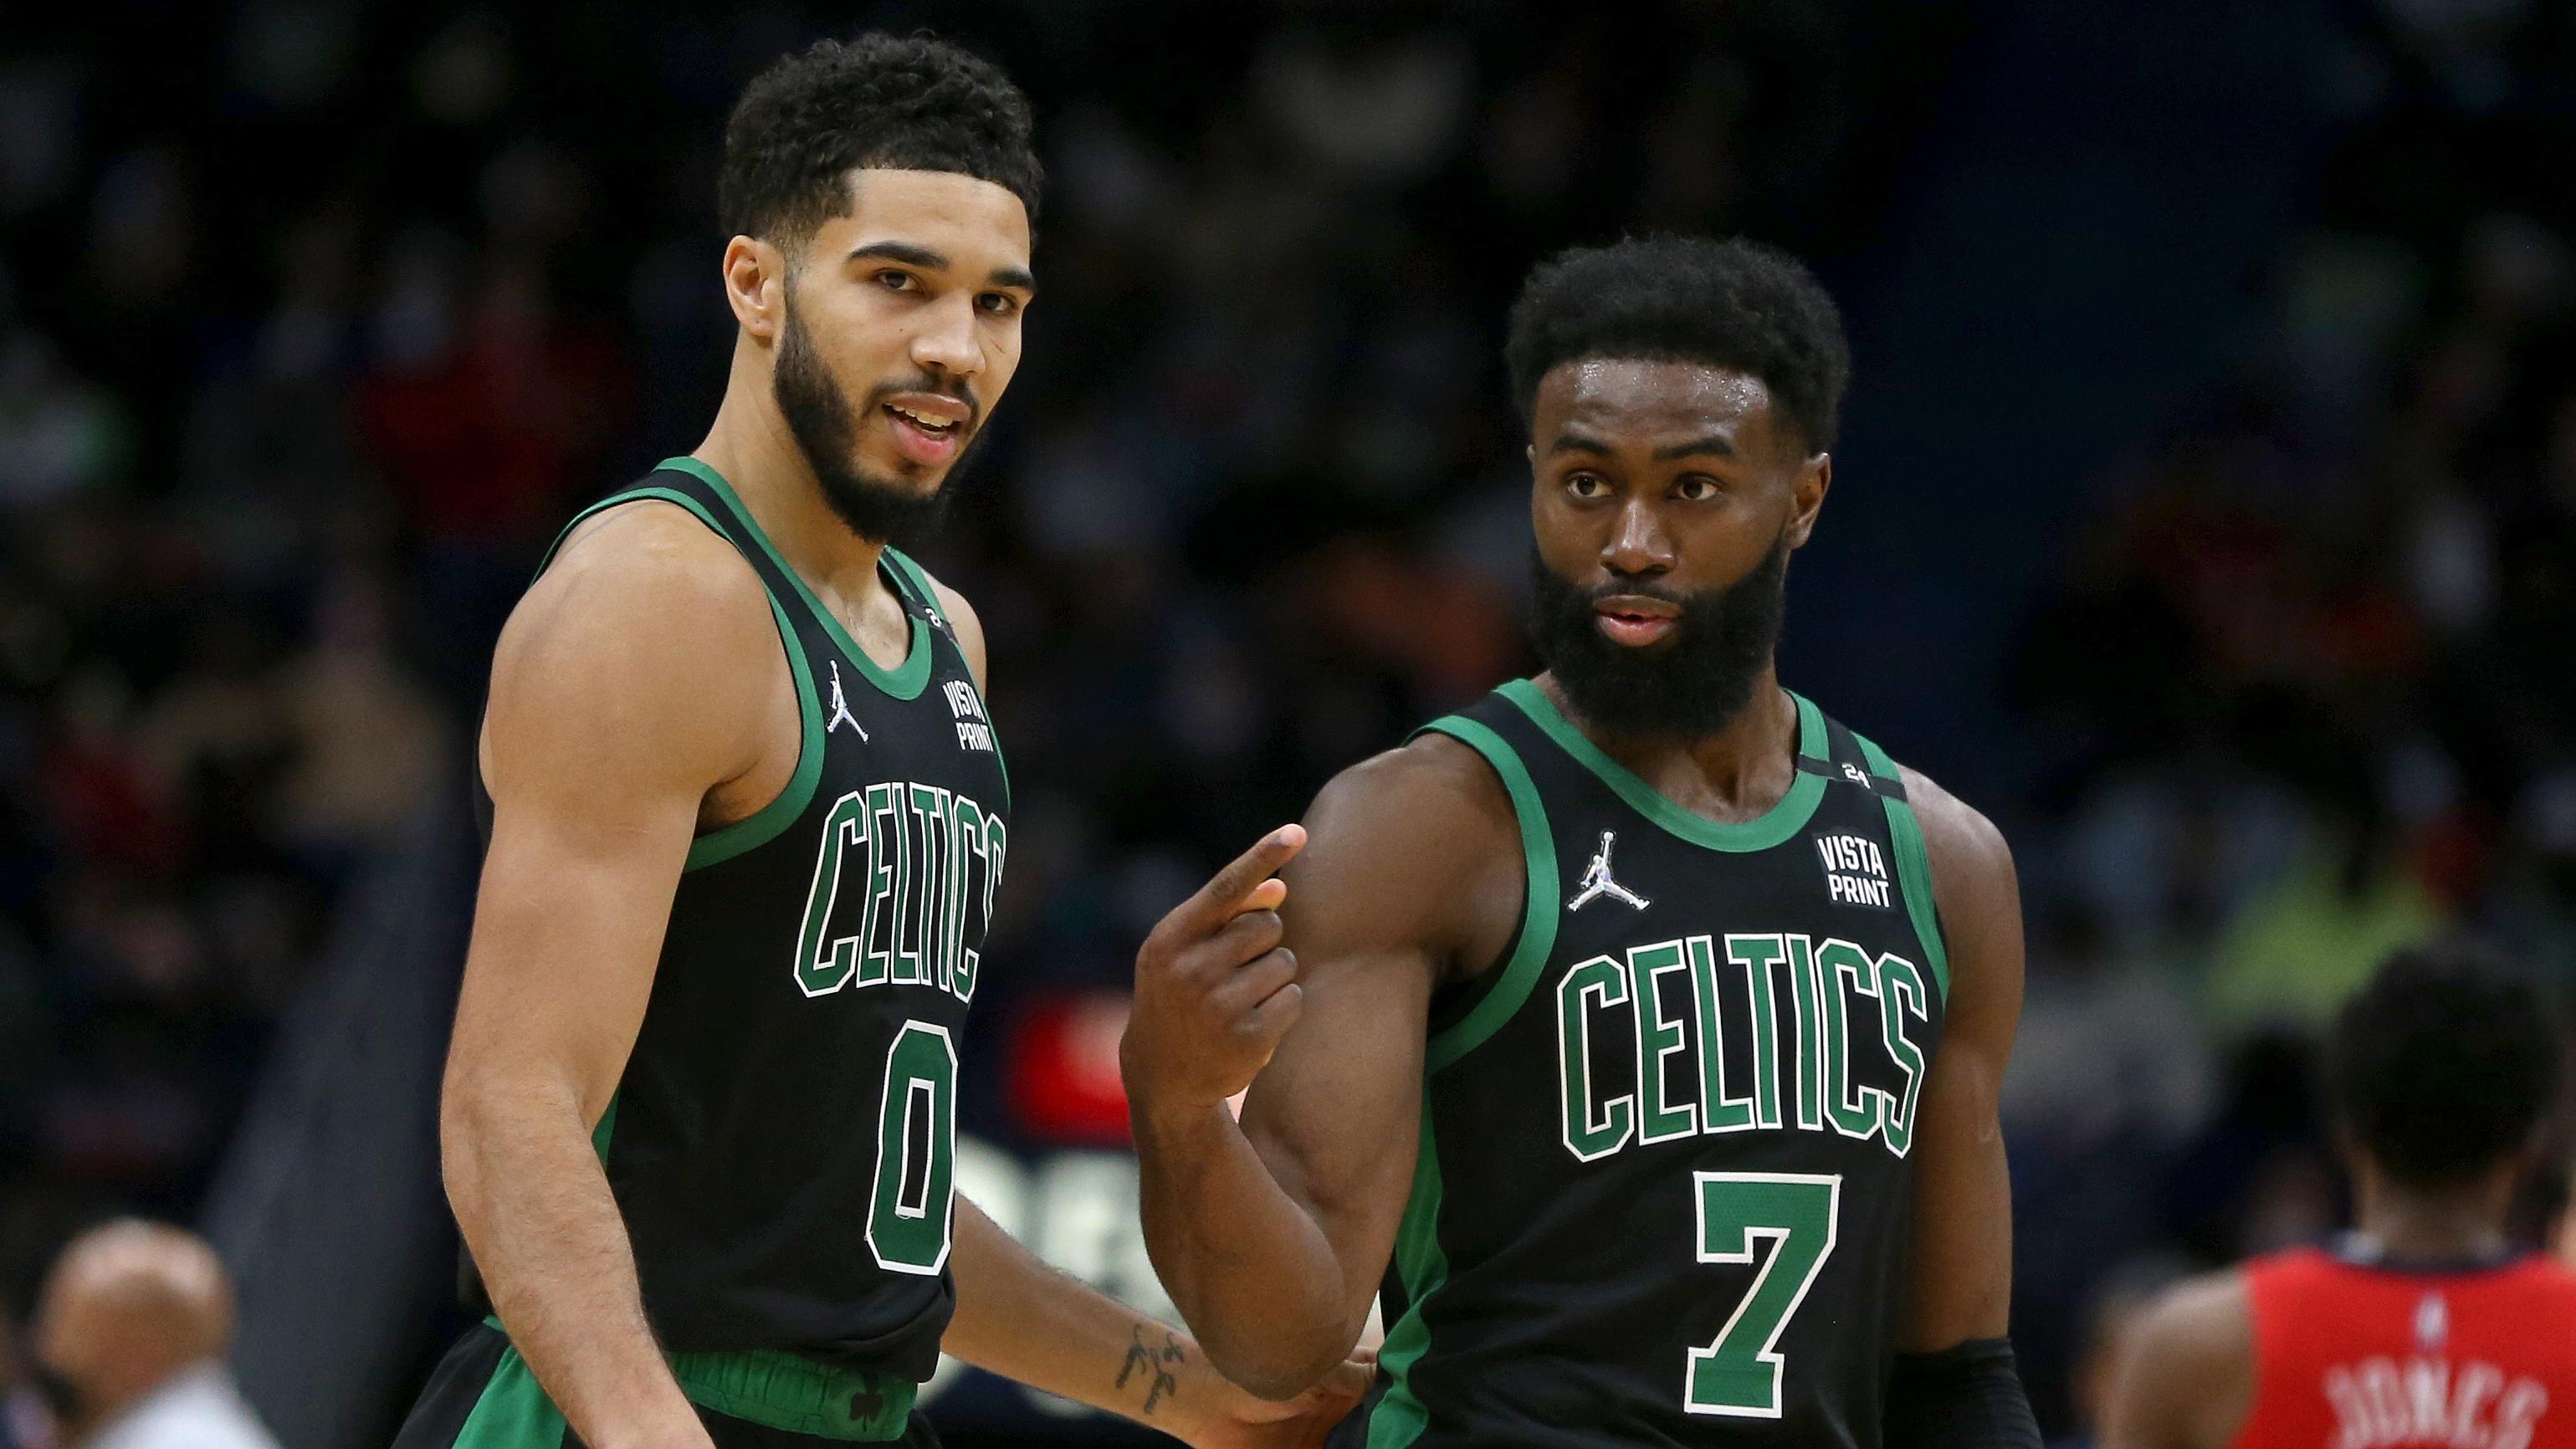 Jan 29, 2022; New Orleans, Louisiana, USA; Boston Celtics forward Jayson Tatum (0) talks to guard Jaylen Brown (7) in the second half against the New Orleans Pelicans at the Smoothie King Center. Mandatory Credit: Chuck Cook-USA TODAY Sports / © Chuck Cook-USA TODAY Sports